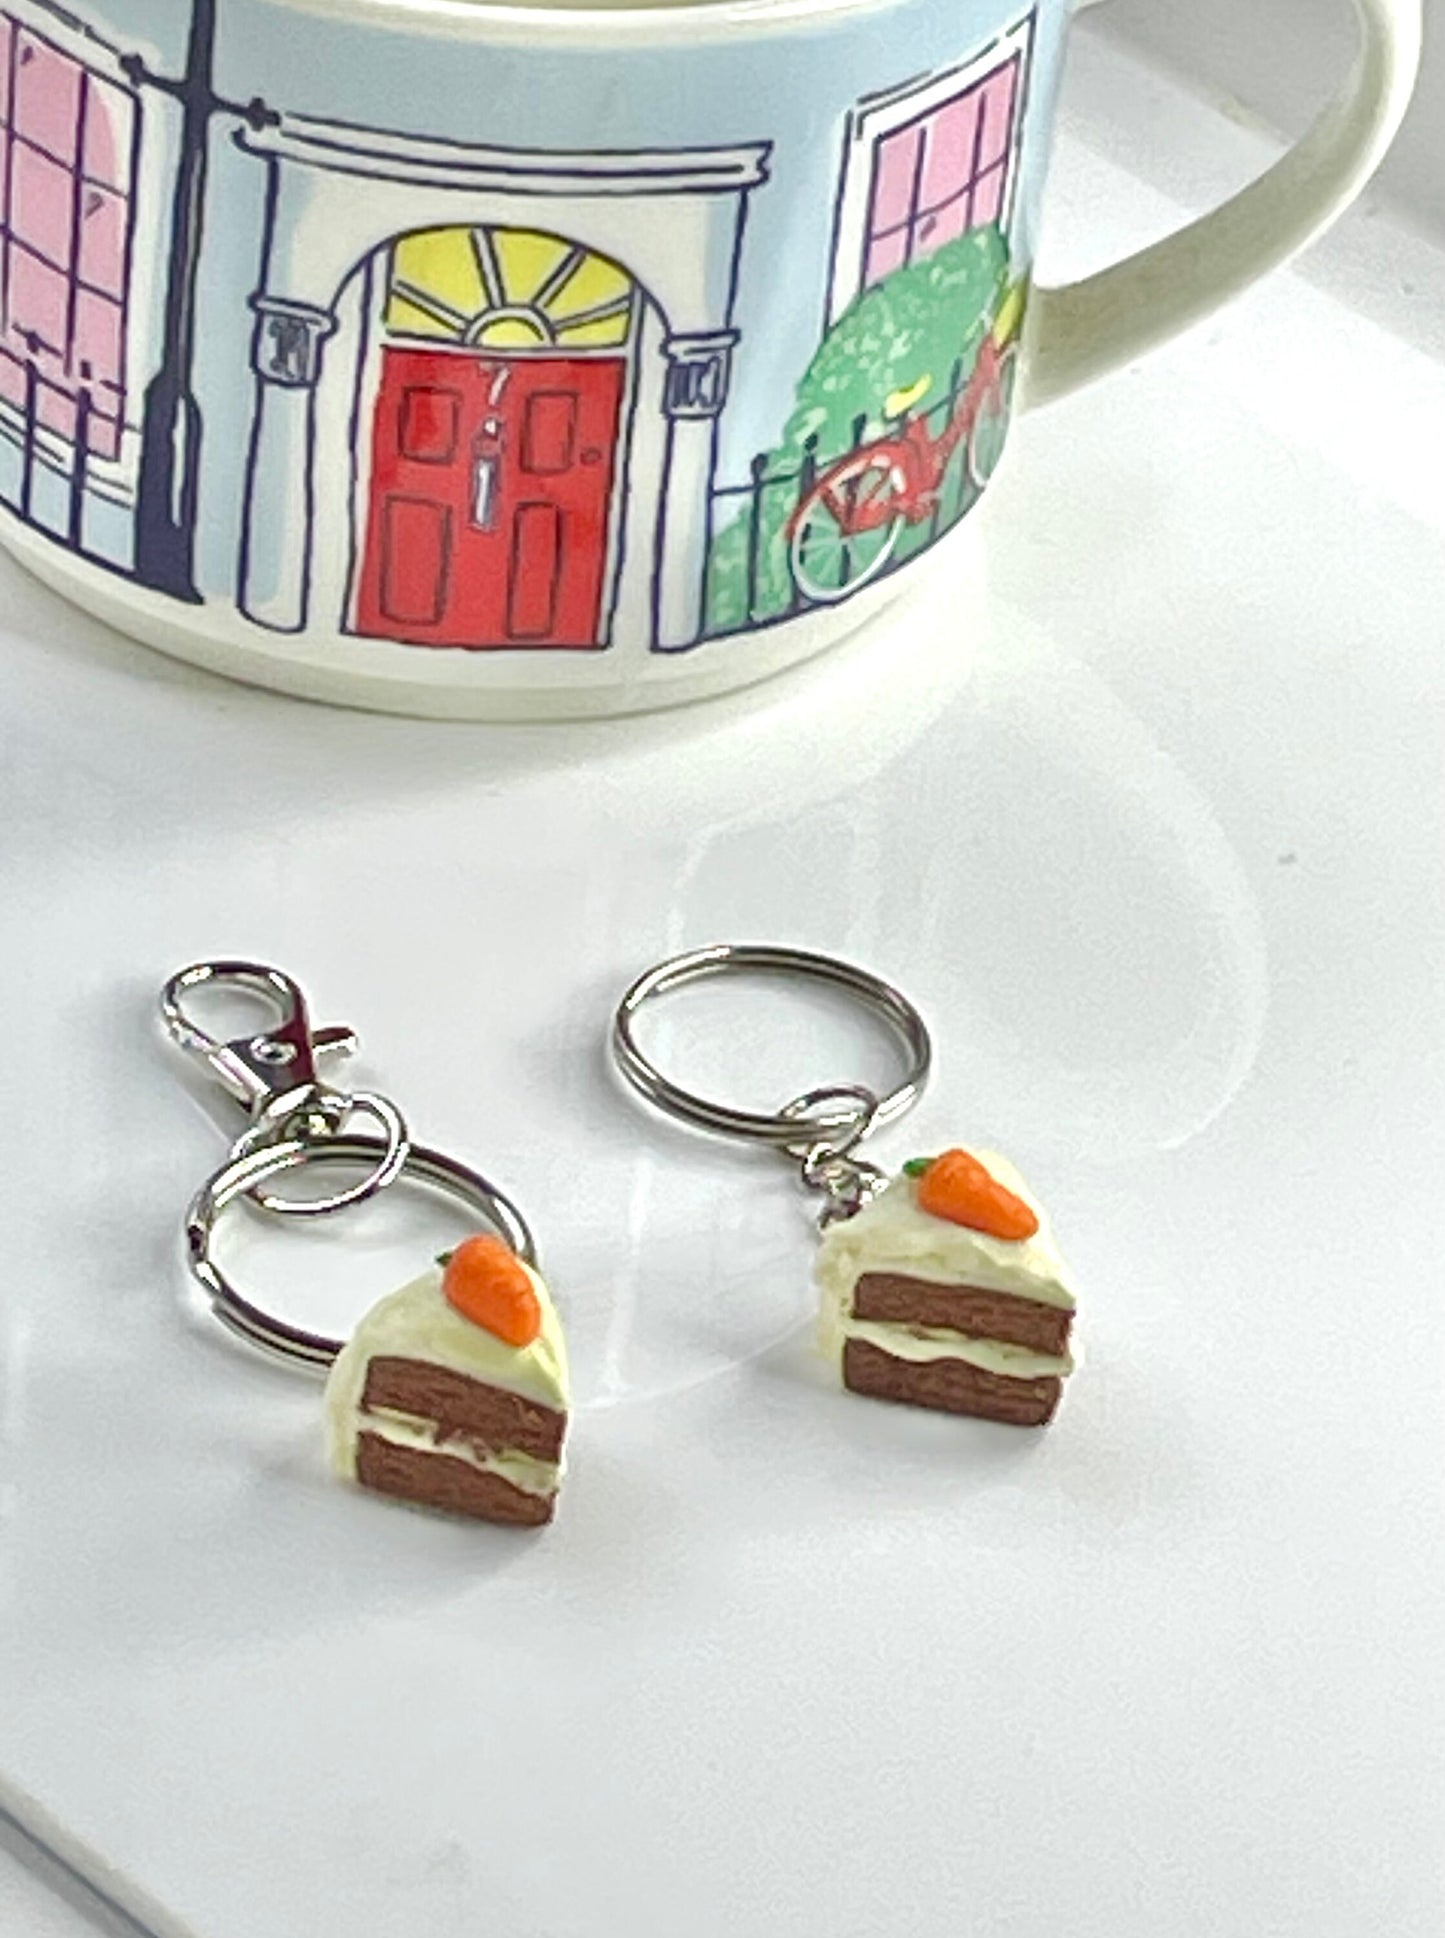 Handmade Clay Carrot Cake Quirky Keyring